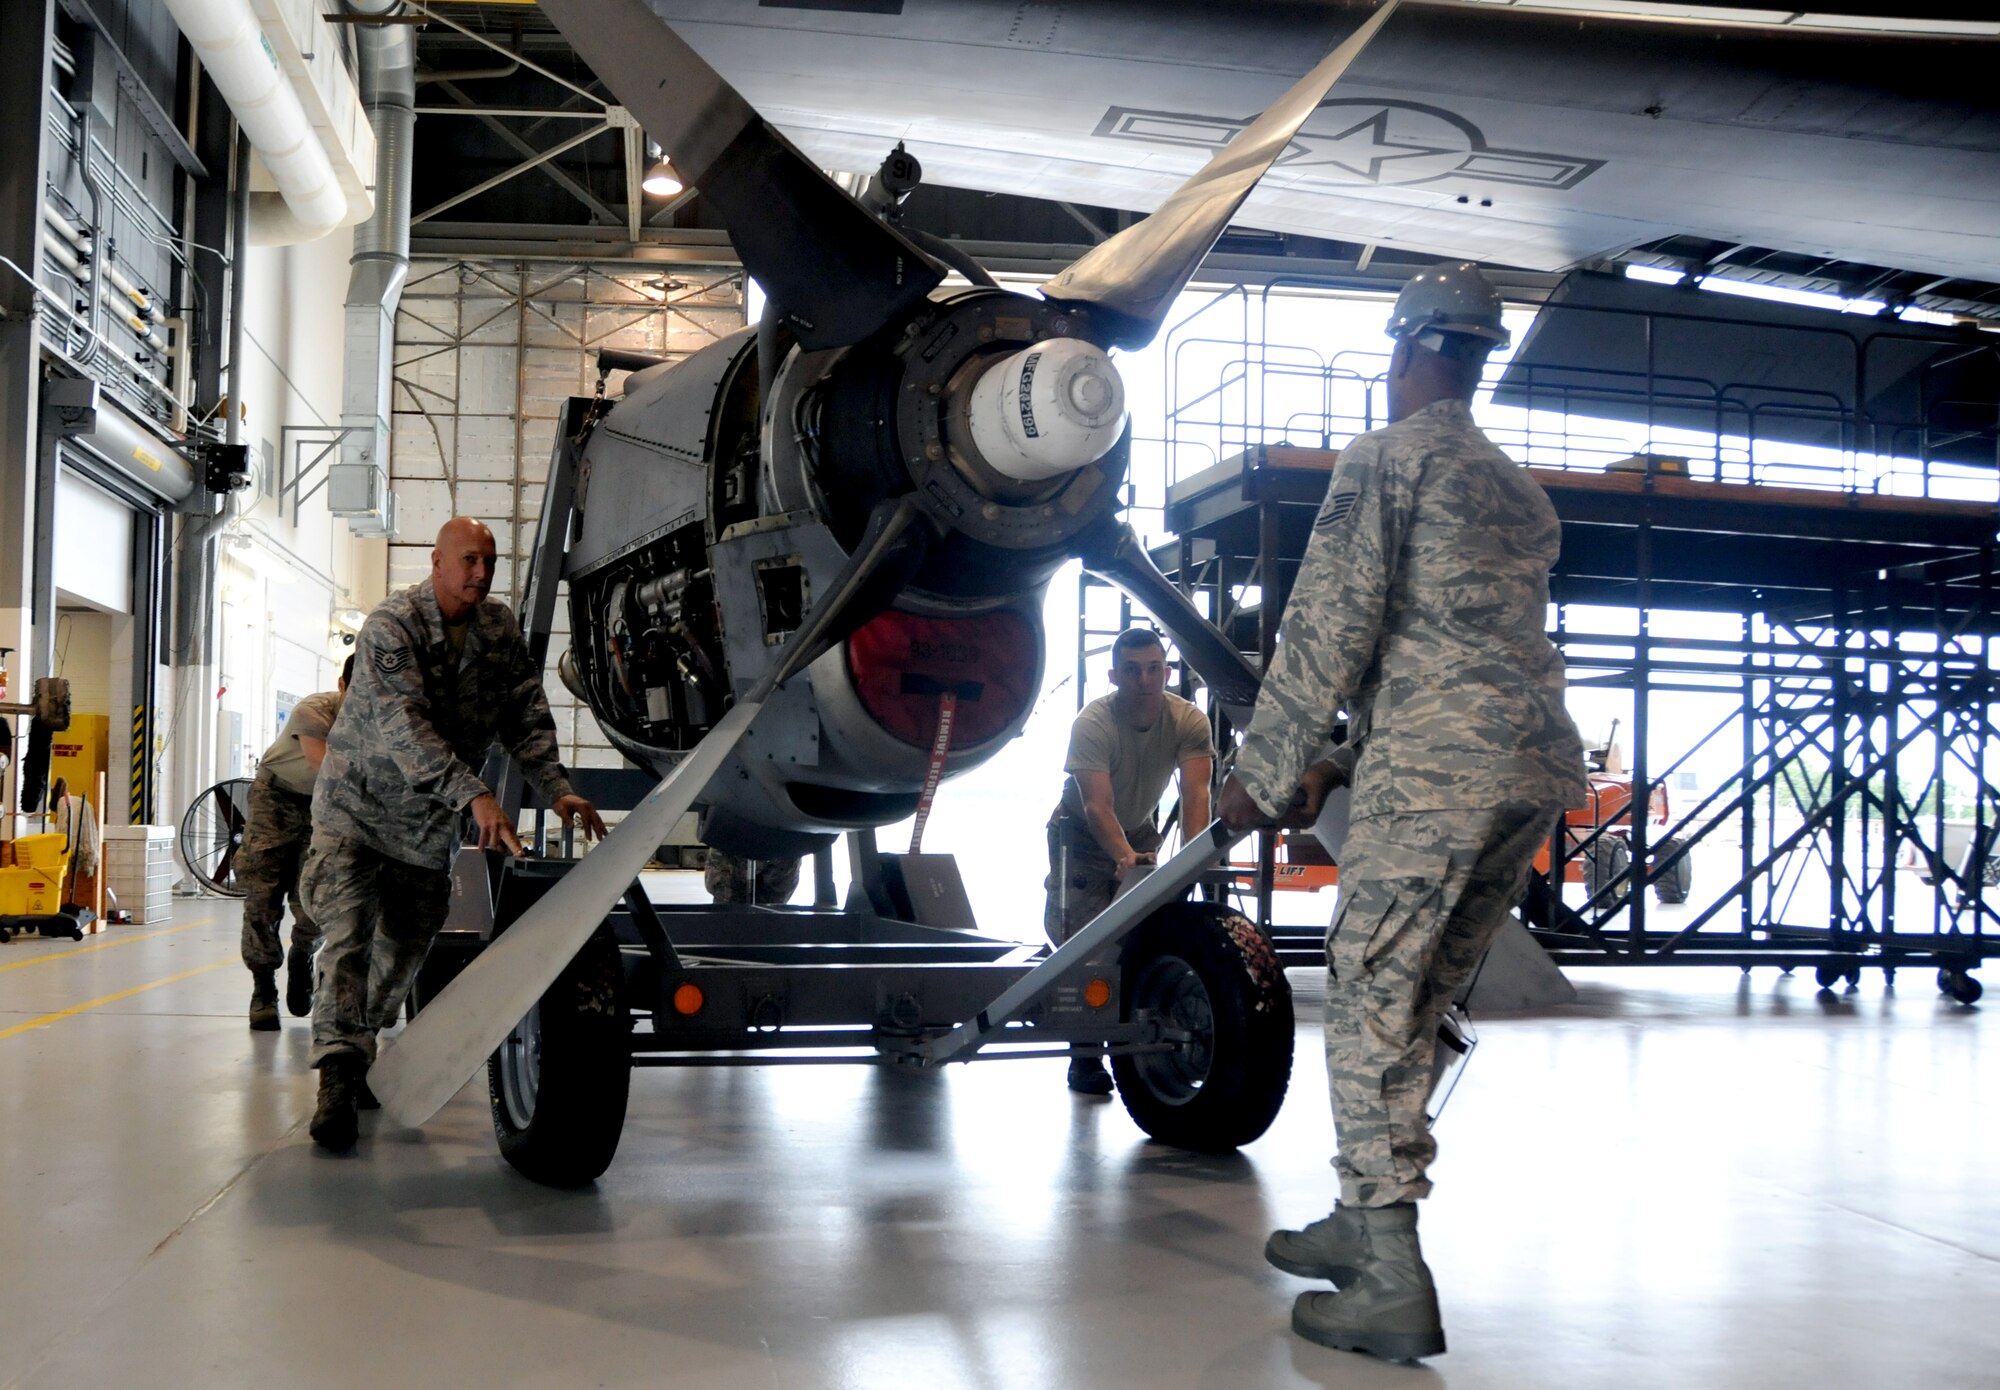 Airmen of the 94th Maintenance Squadron move the engine of a C-130 Hercules at Dobbins Air Reserve Base, Ga., Sept. 25, 2014. On Sept. 29, the 94th Airlift Wing is sending one C-130 and a team of 44 Airmen to partake in RED FLAG-Alaska 15-1. (U.S. Air Force photo by Senior Airman Daniel Phelps/Released)